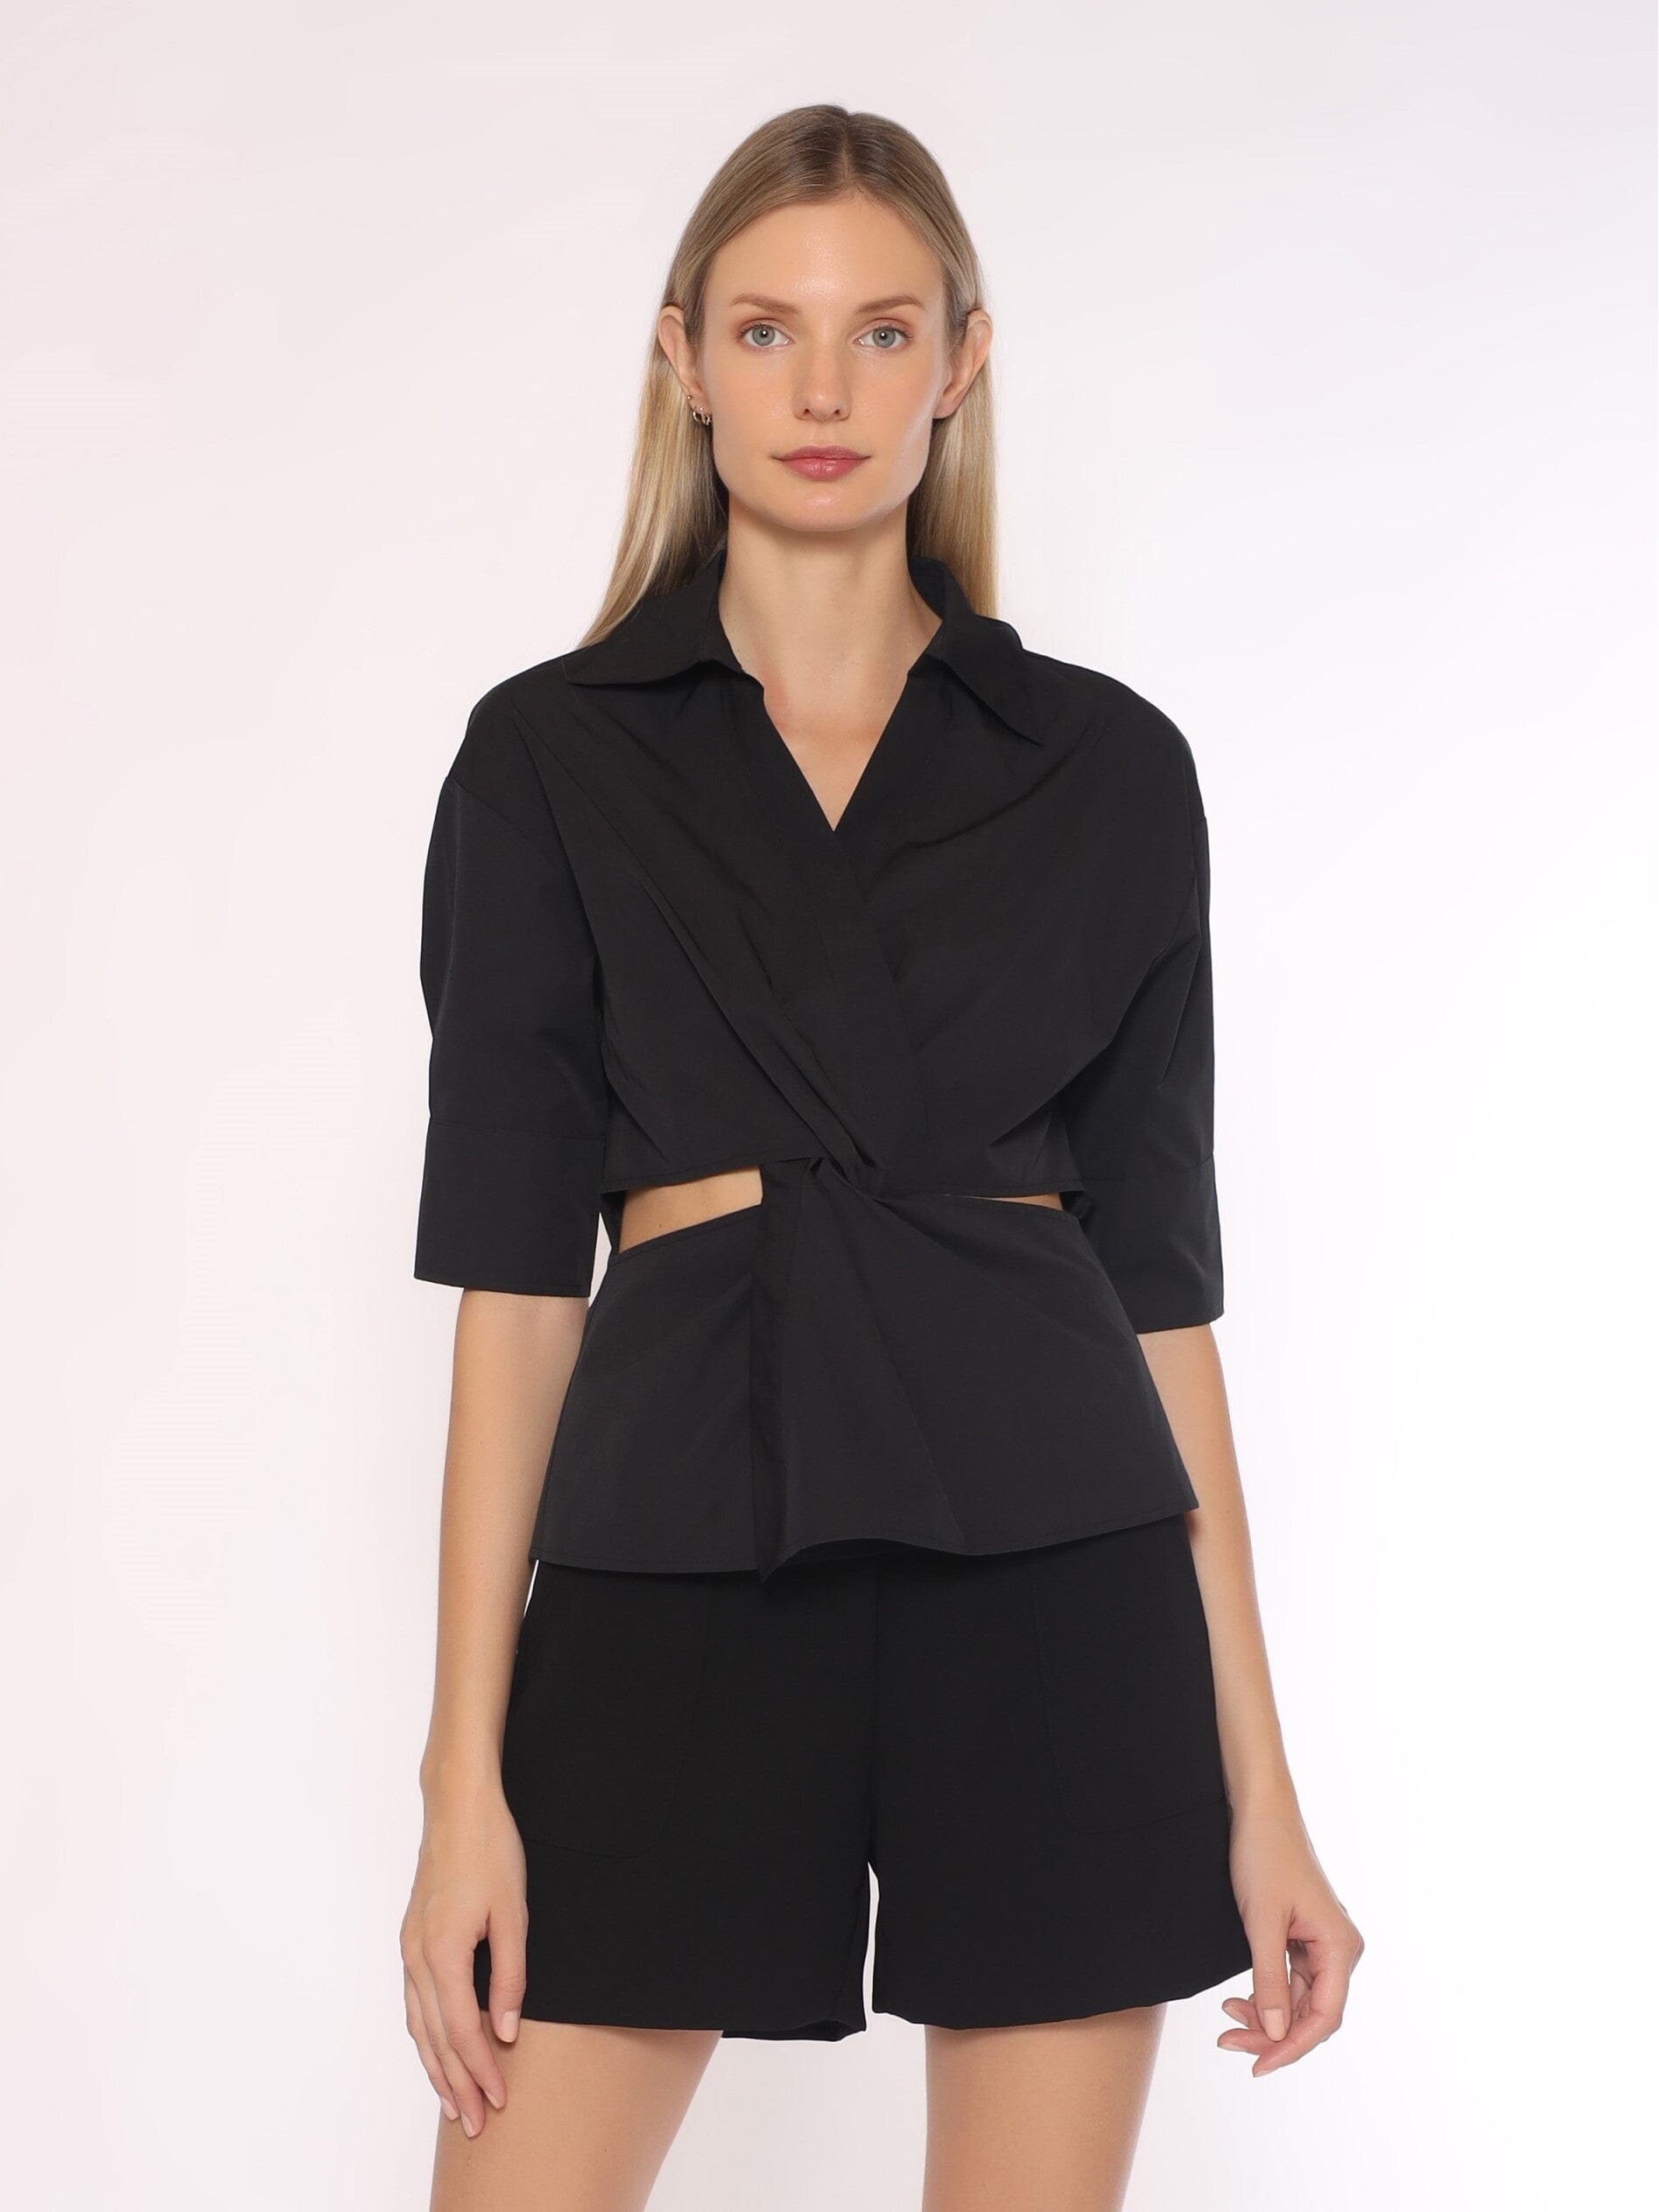 Collared Twisting Point Top with Cut Outs TOP Gracia Fashion BLACK S 